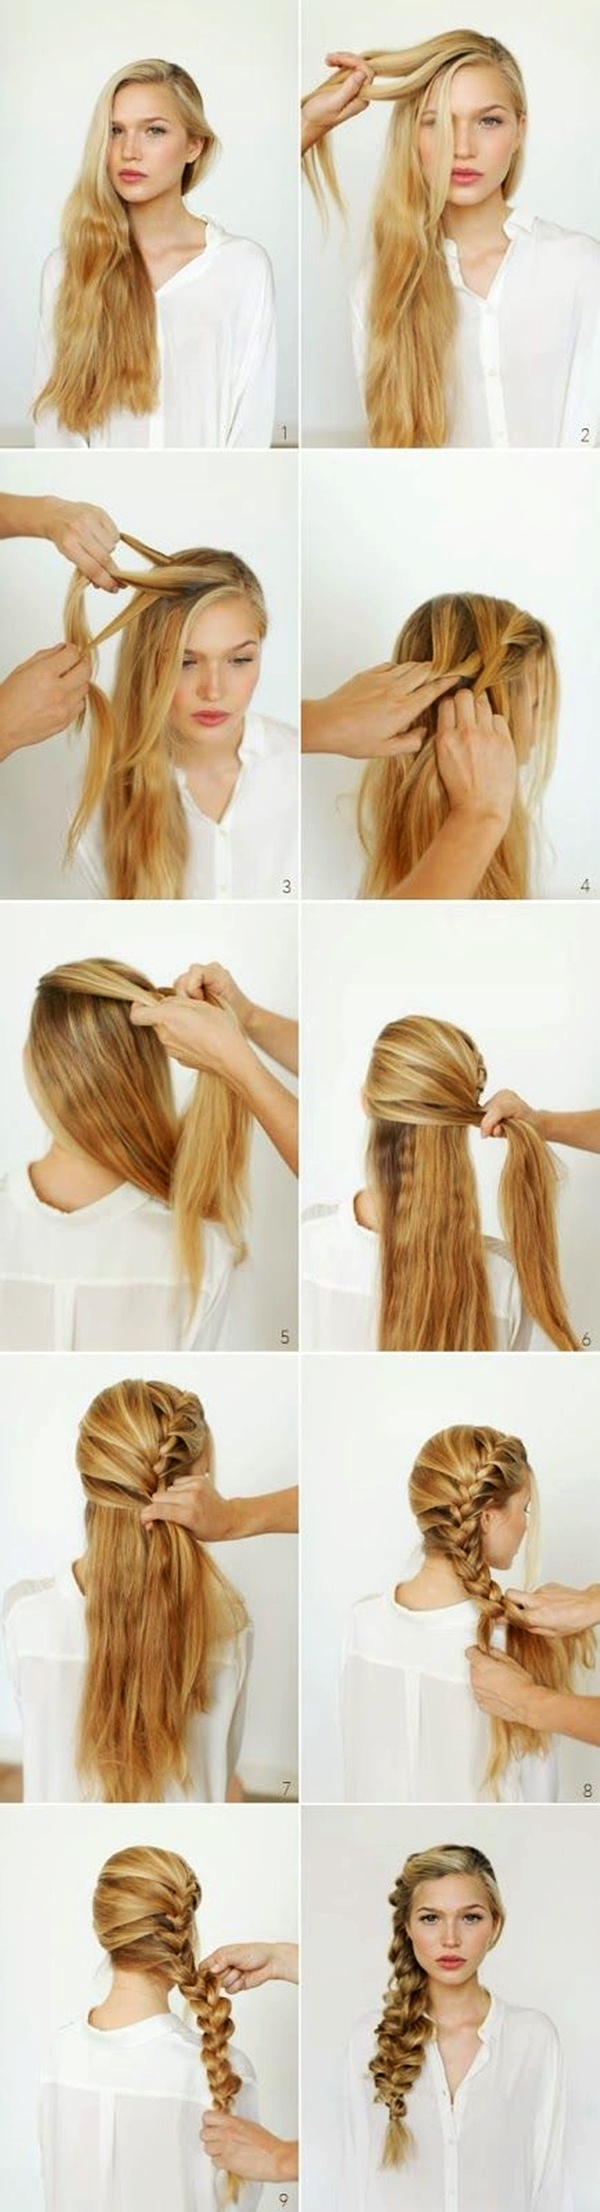 Easy Step By Step Hairstyles for Long Hair7